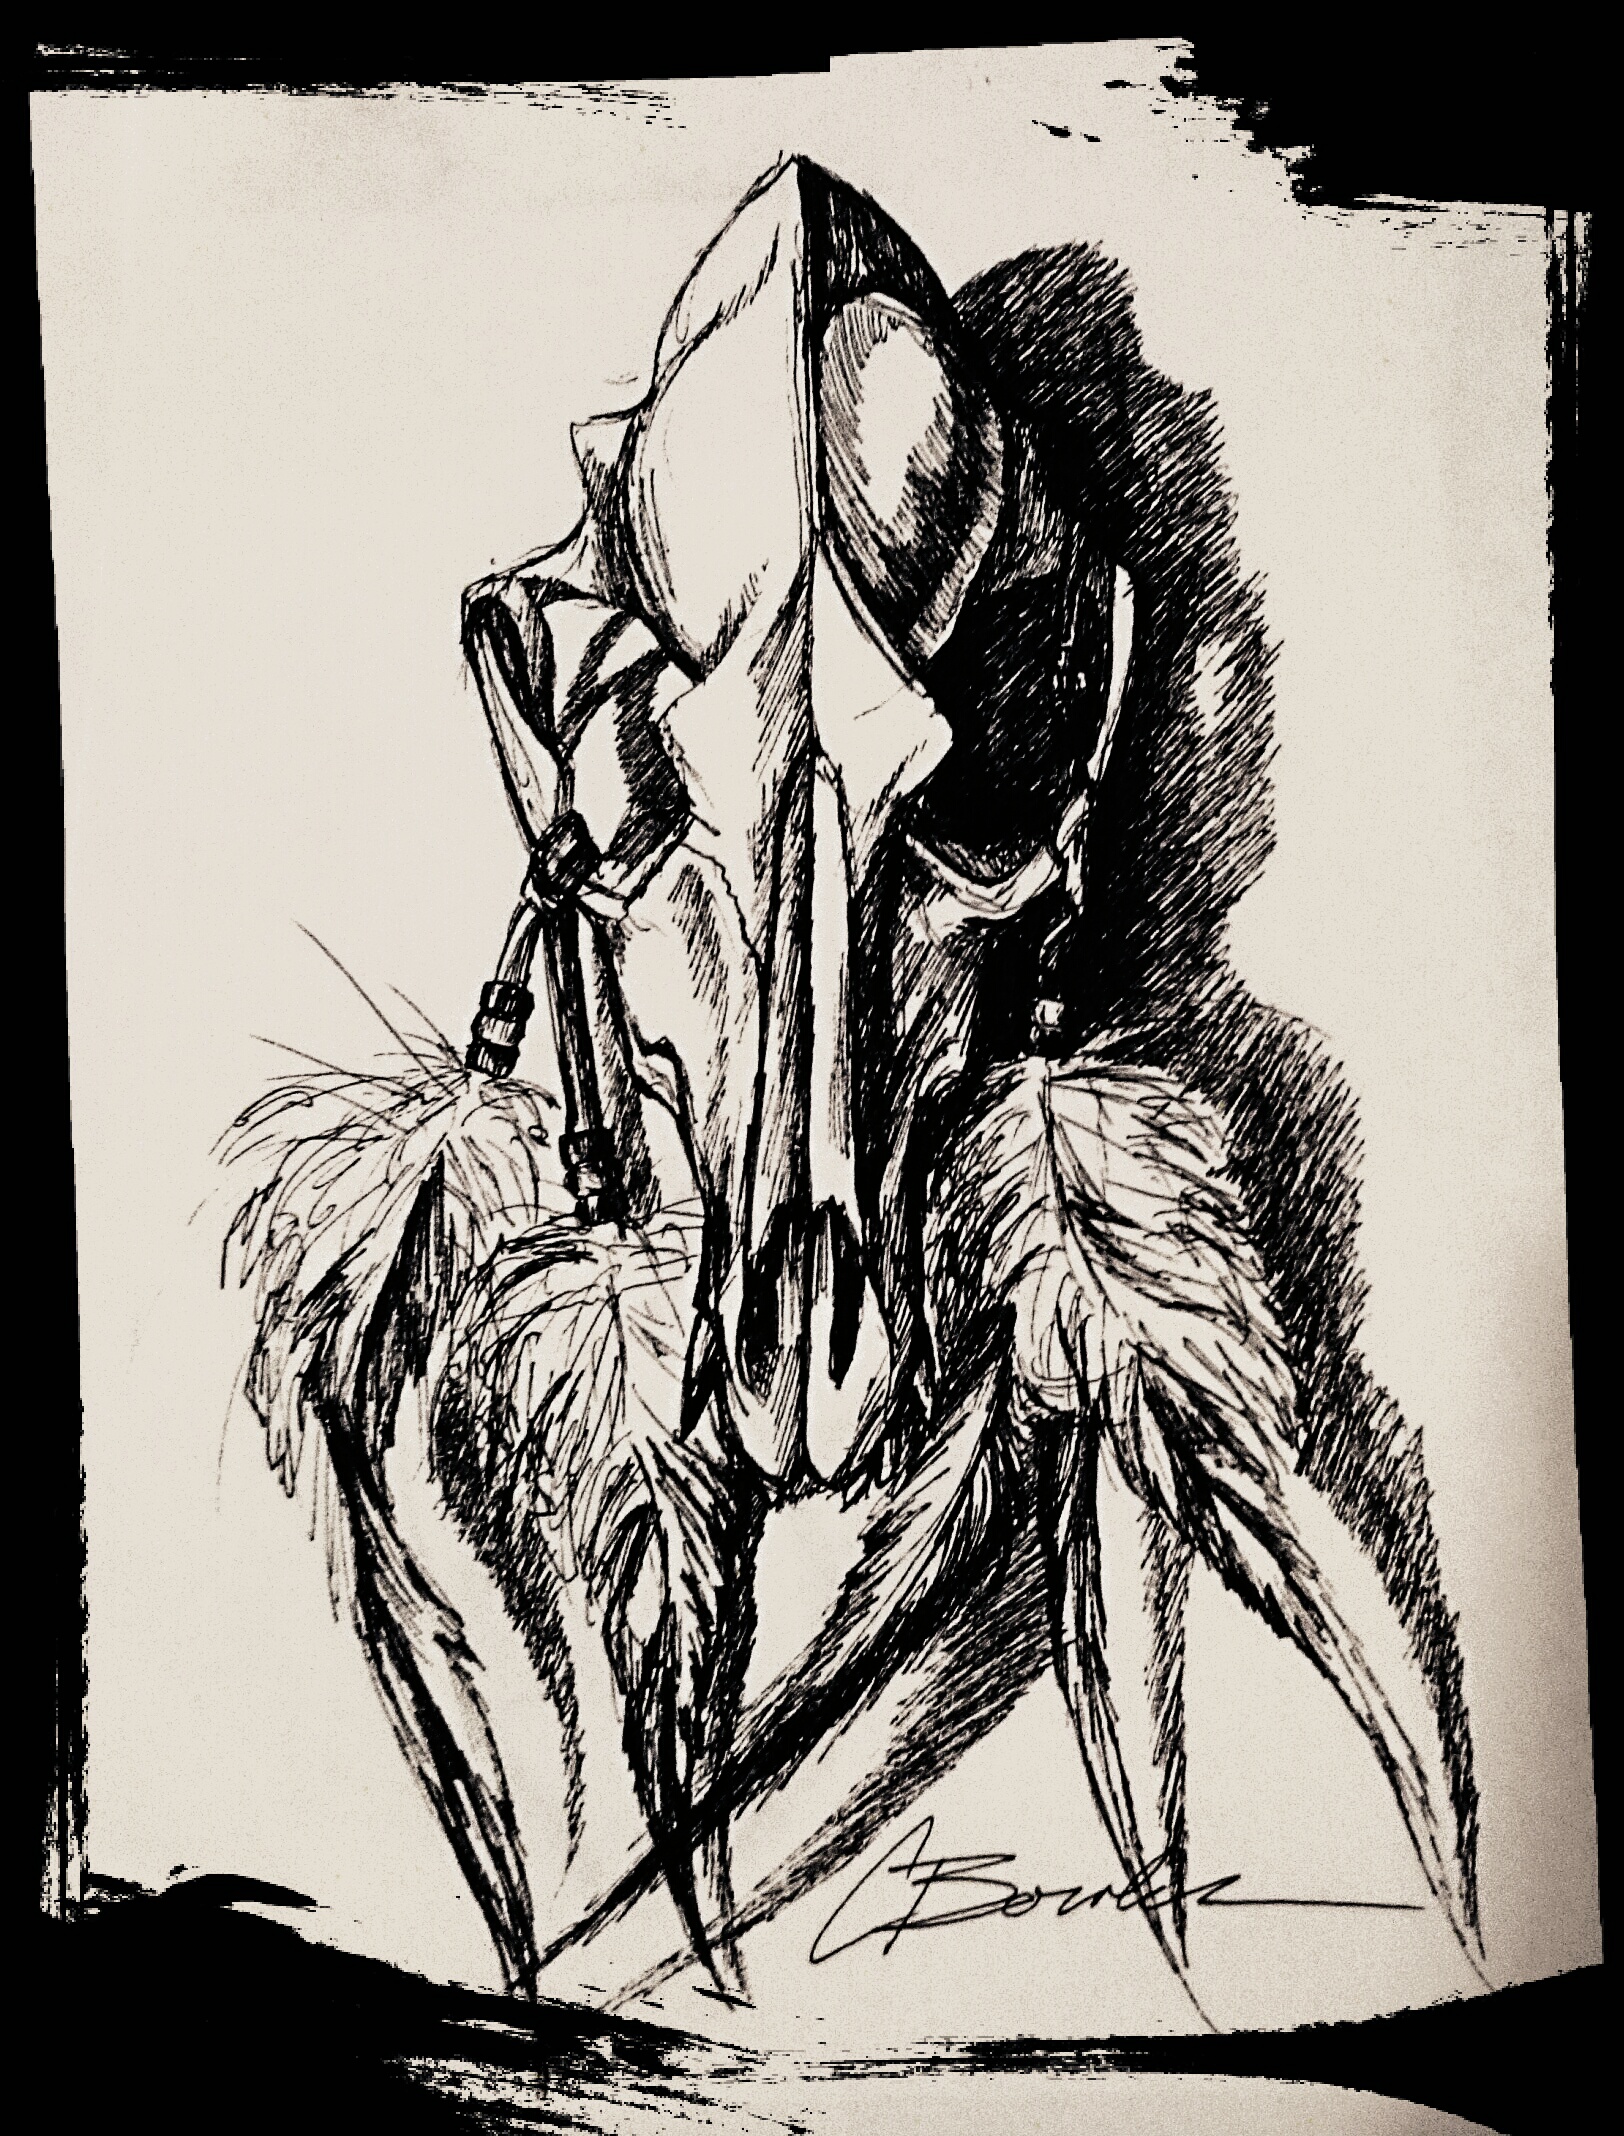 Coyote Skull - ink drawing